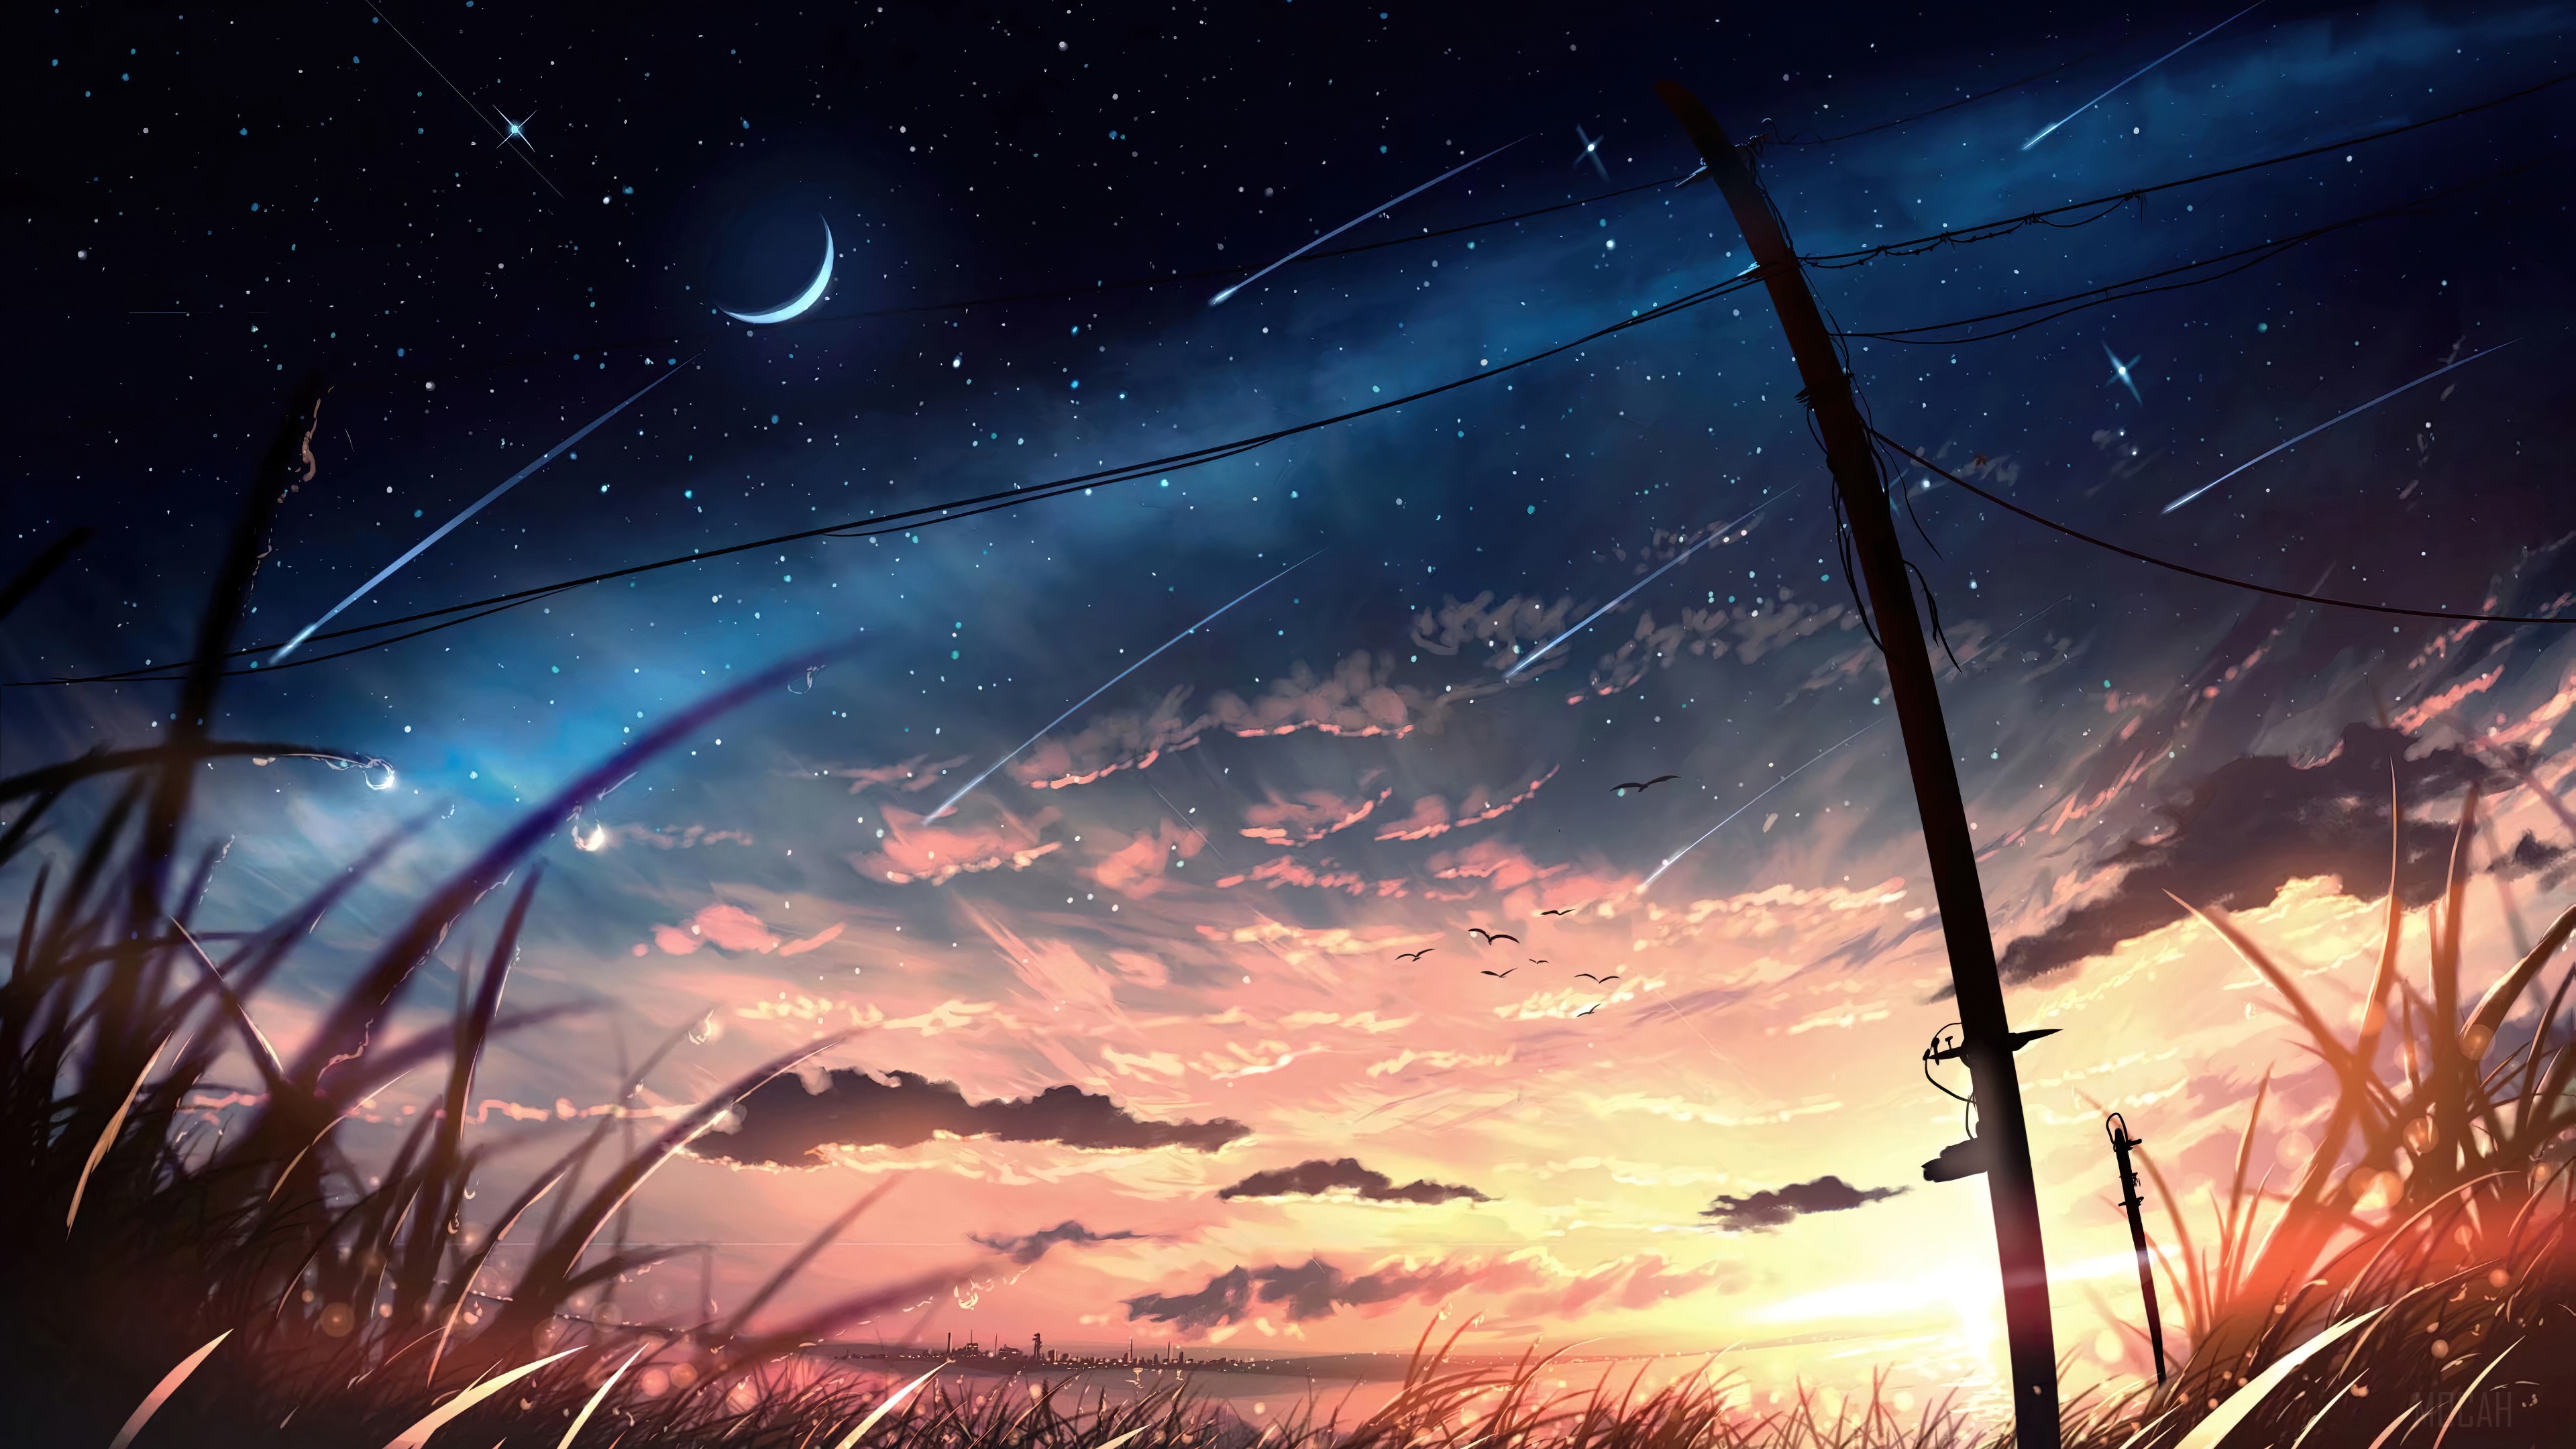 11,118 Anime Sky Background Images, Stock Photos & Vectors | Shutterstock